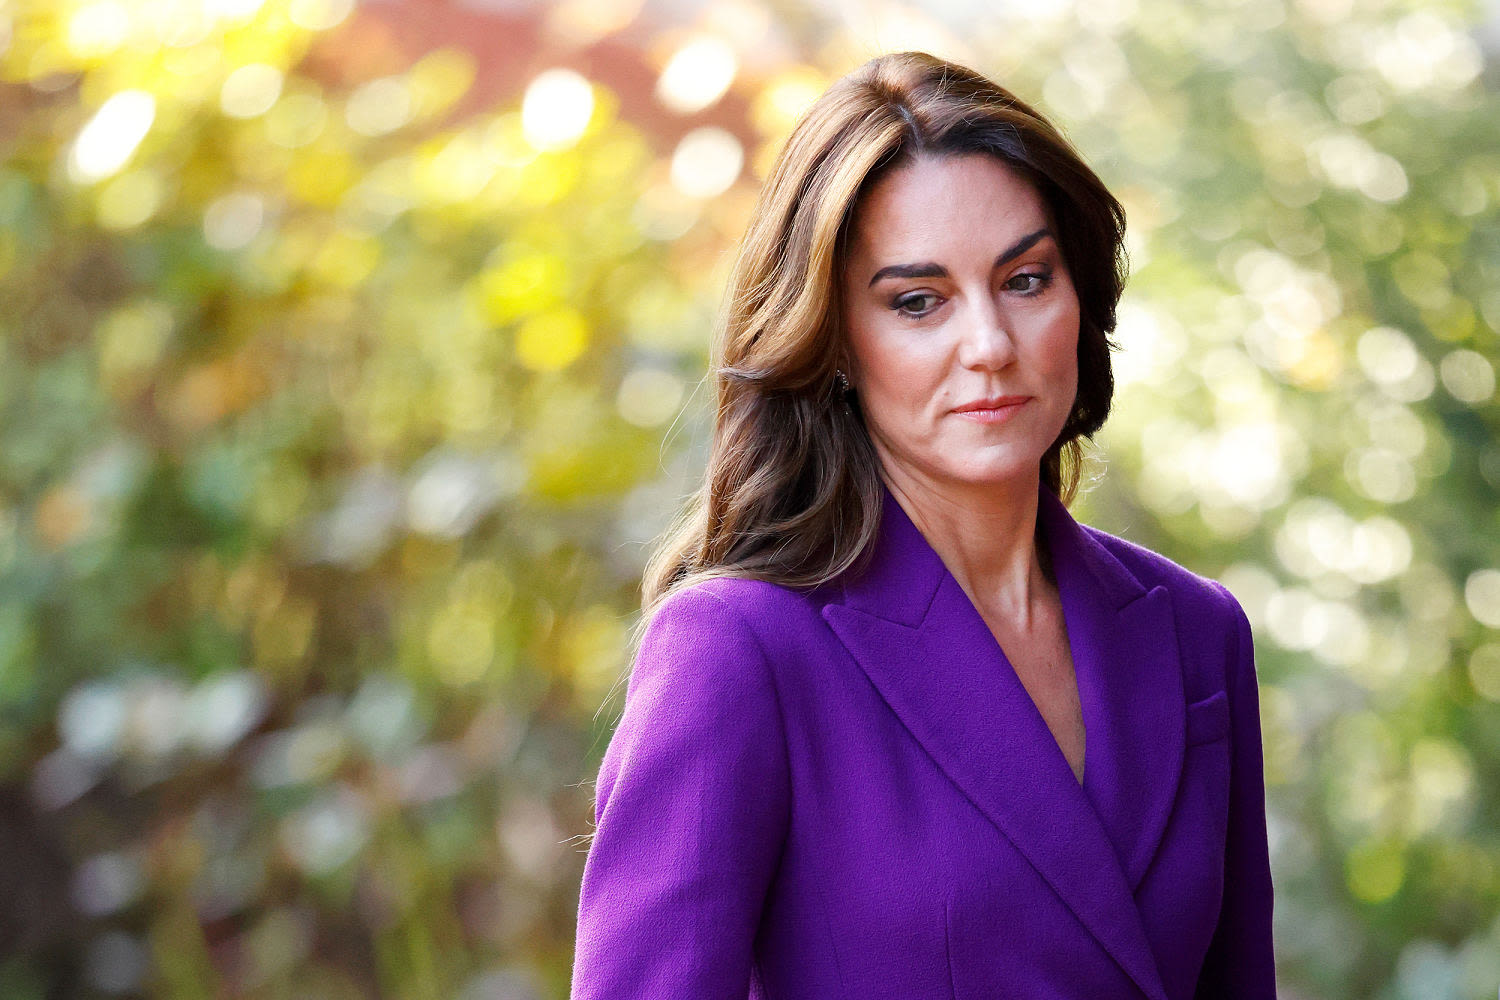 Princess Kate won't attend upcoming military ceremony as she continues cancer treatment